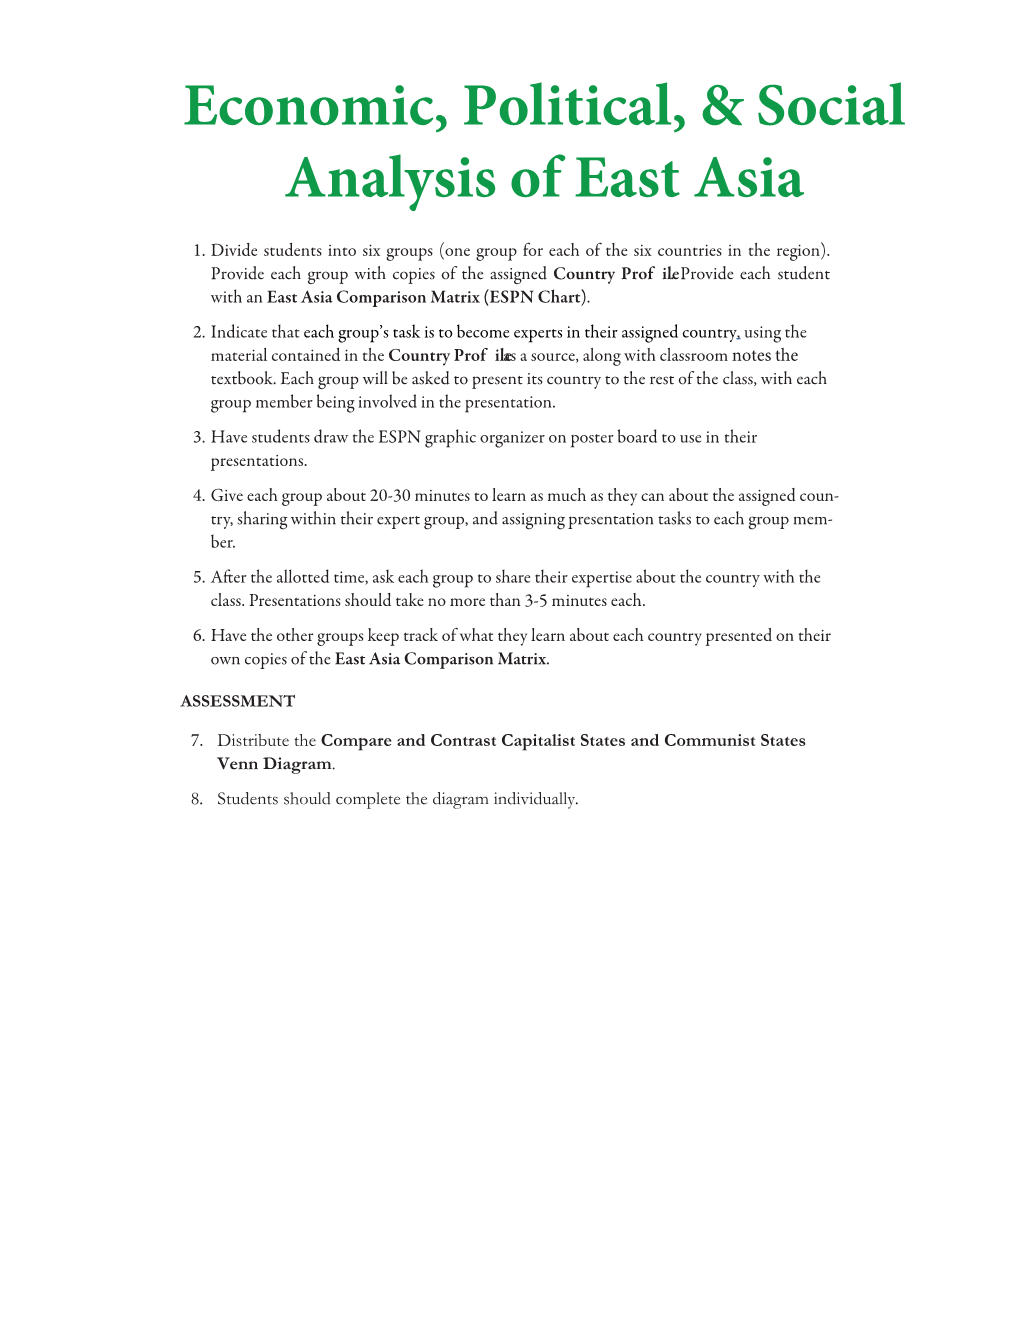 Economic, Political, & Social Analysis of East Asia